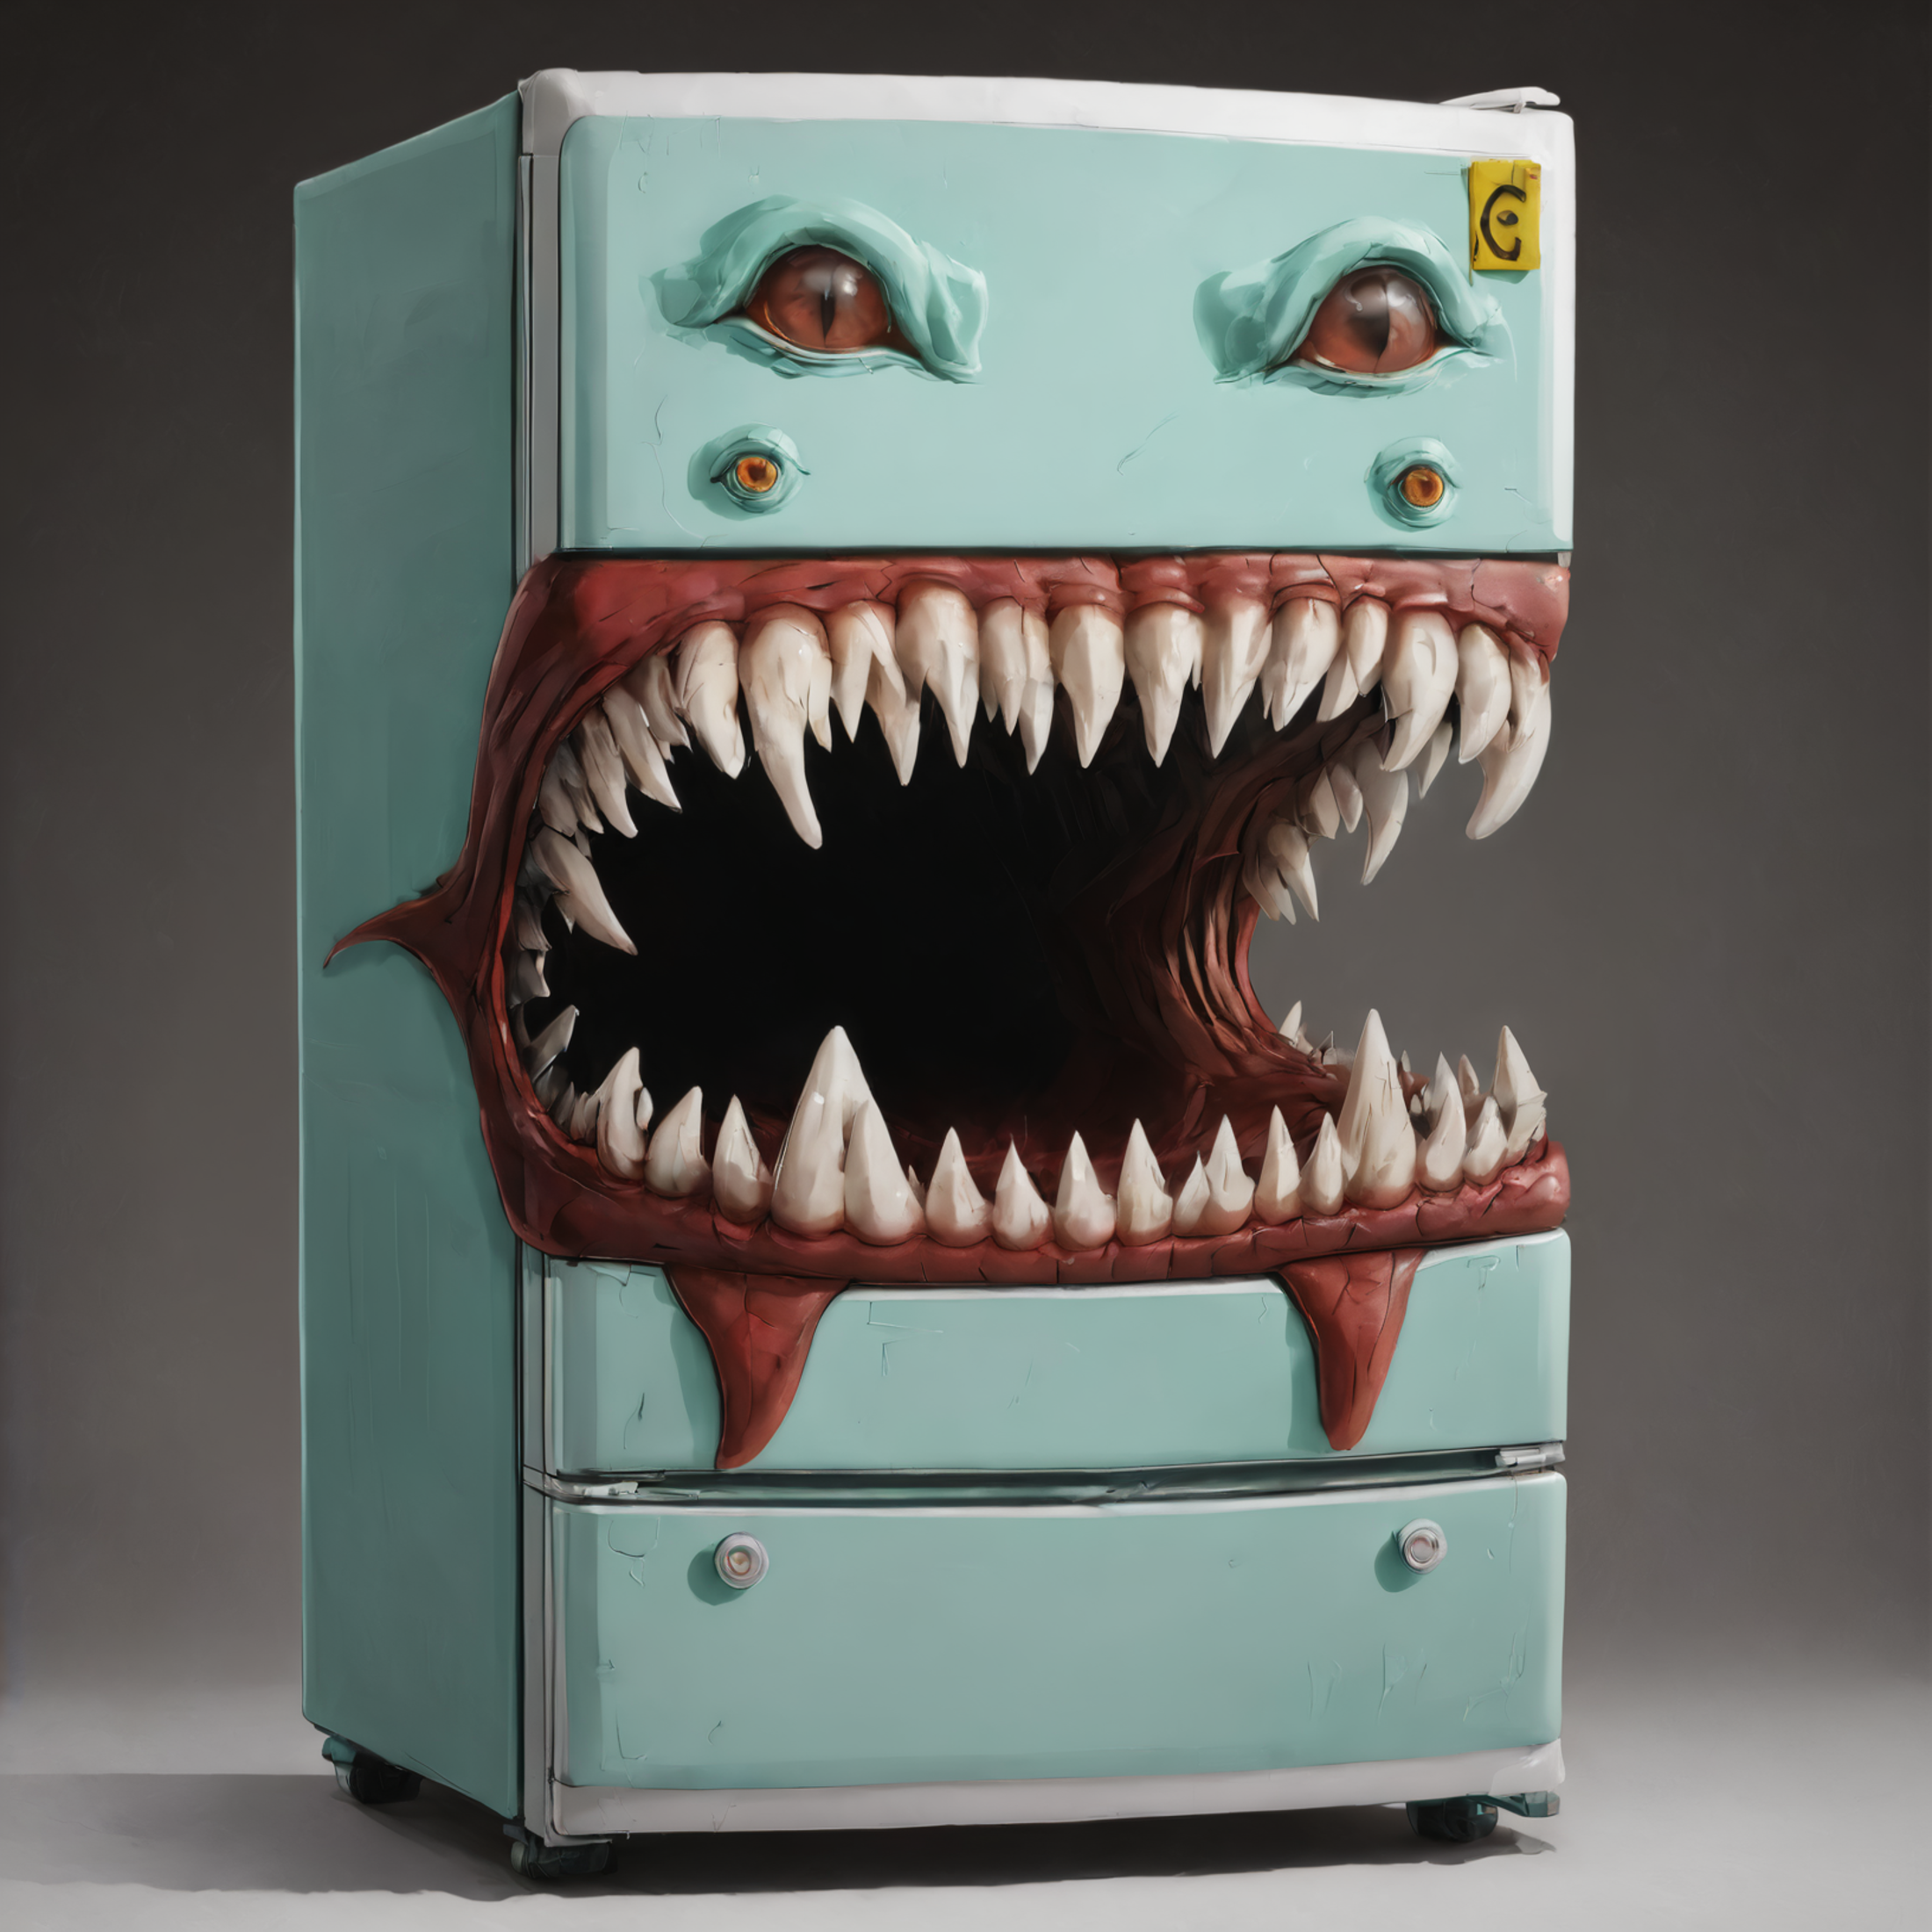 A monster-themed refrigerator with big teeth, fangs, and red eyes.